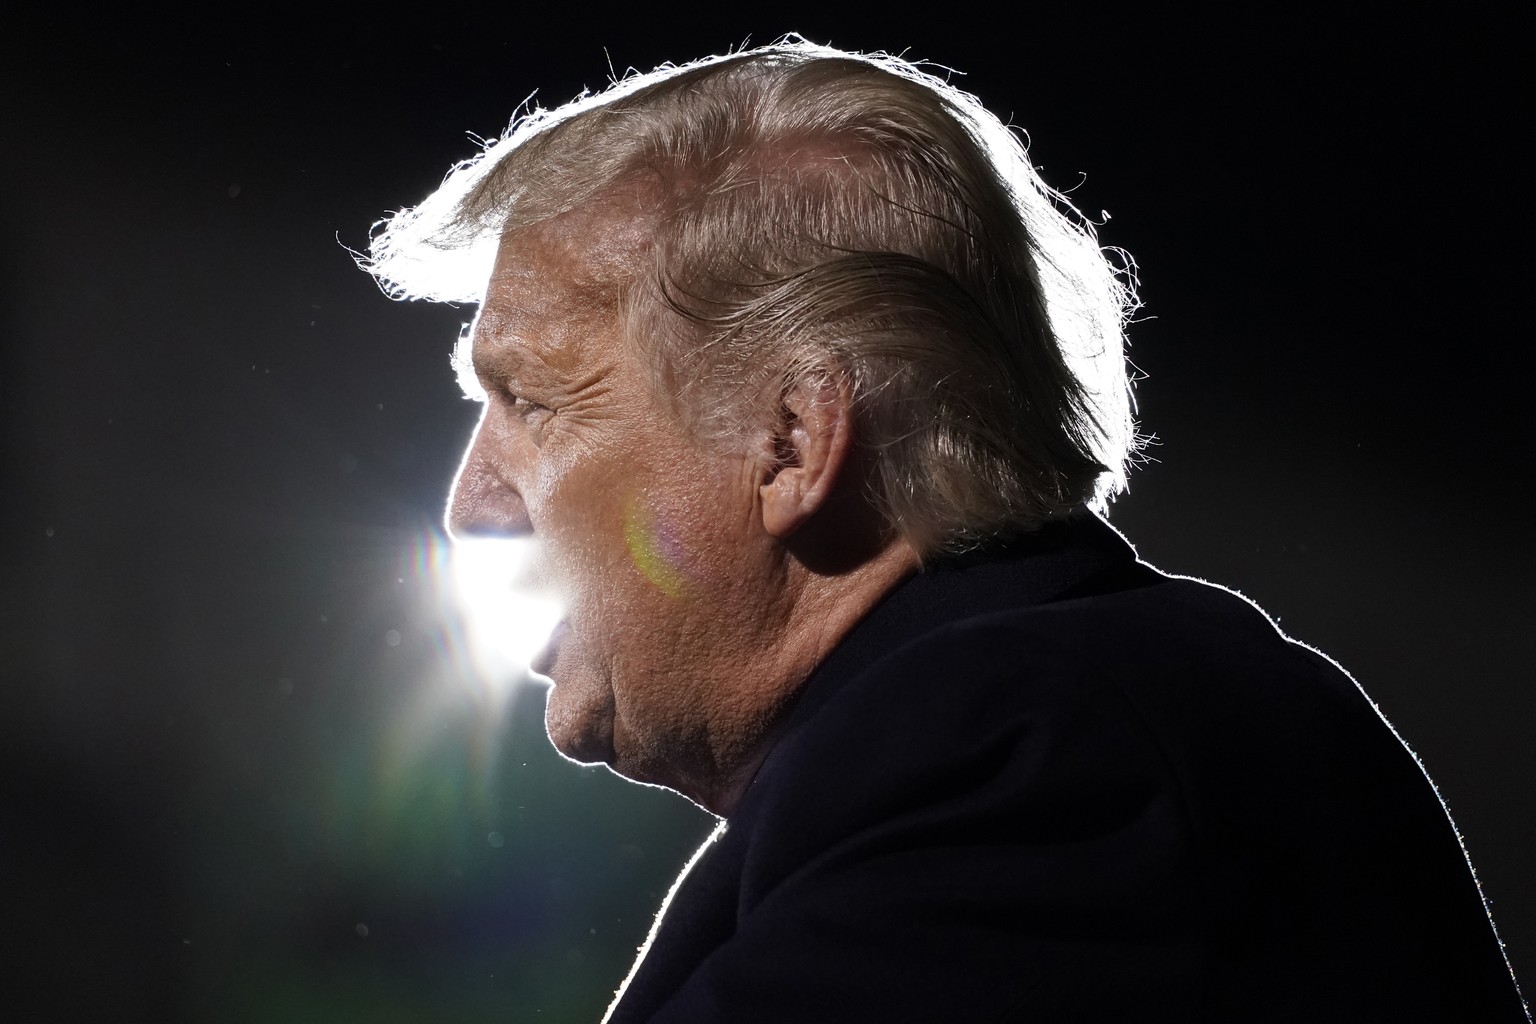 President Donald Trump speaks at a campaign rally at Duluth International Airport, Wednesday, Sept. 30, 2020, in Duluth, Minn. (AP Photo/Alex Brandon)
Donald Trump